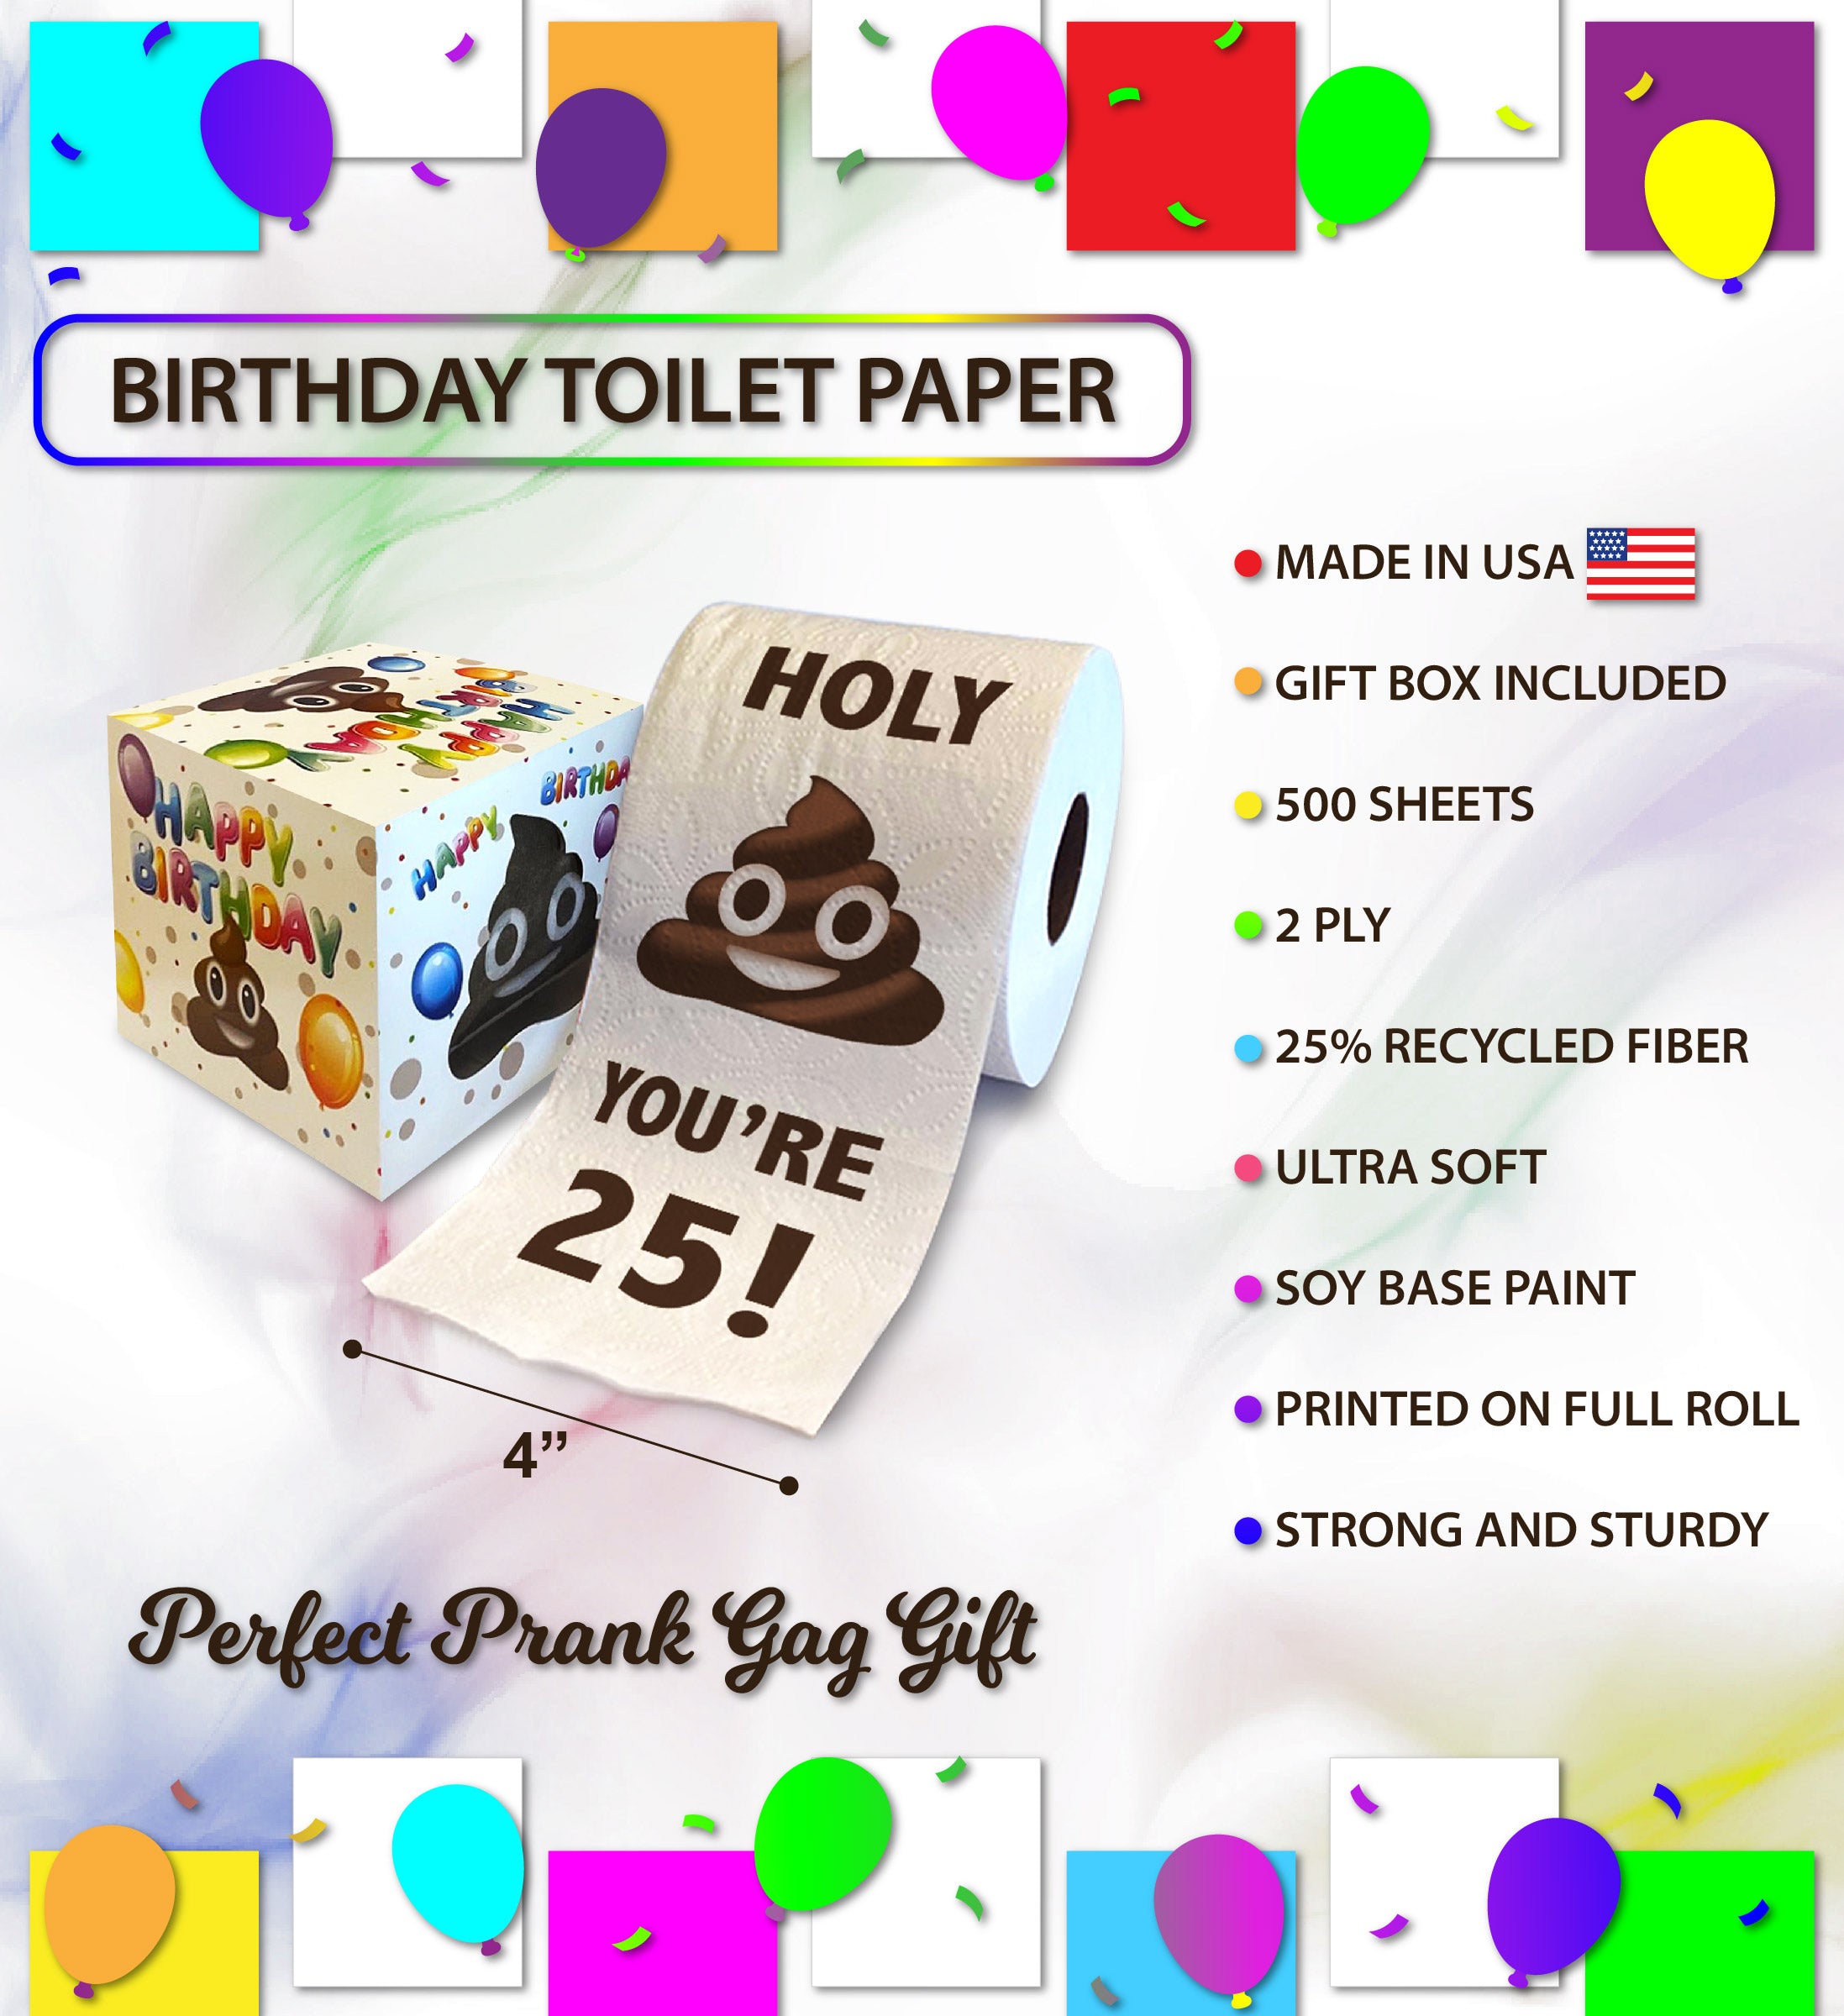 40 Most Hilarious & Funny Gifts for Friends - The 2023 Guide